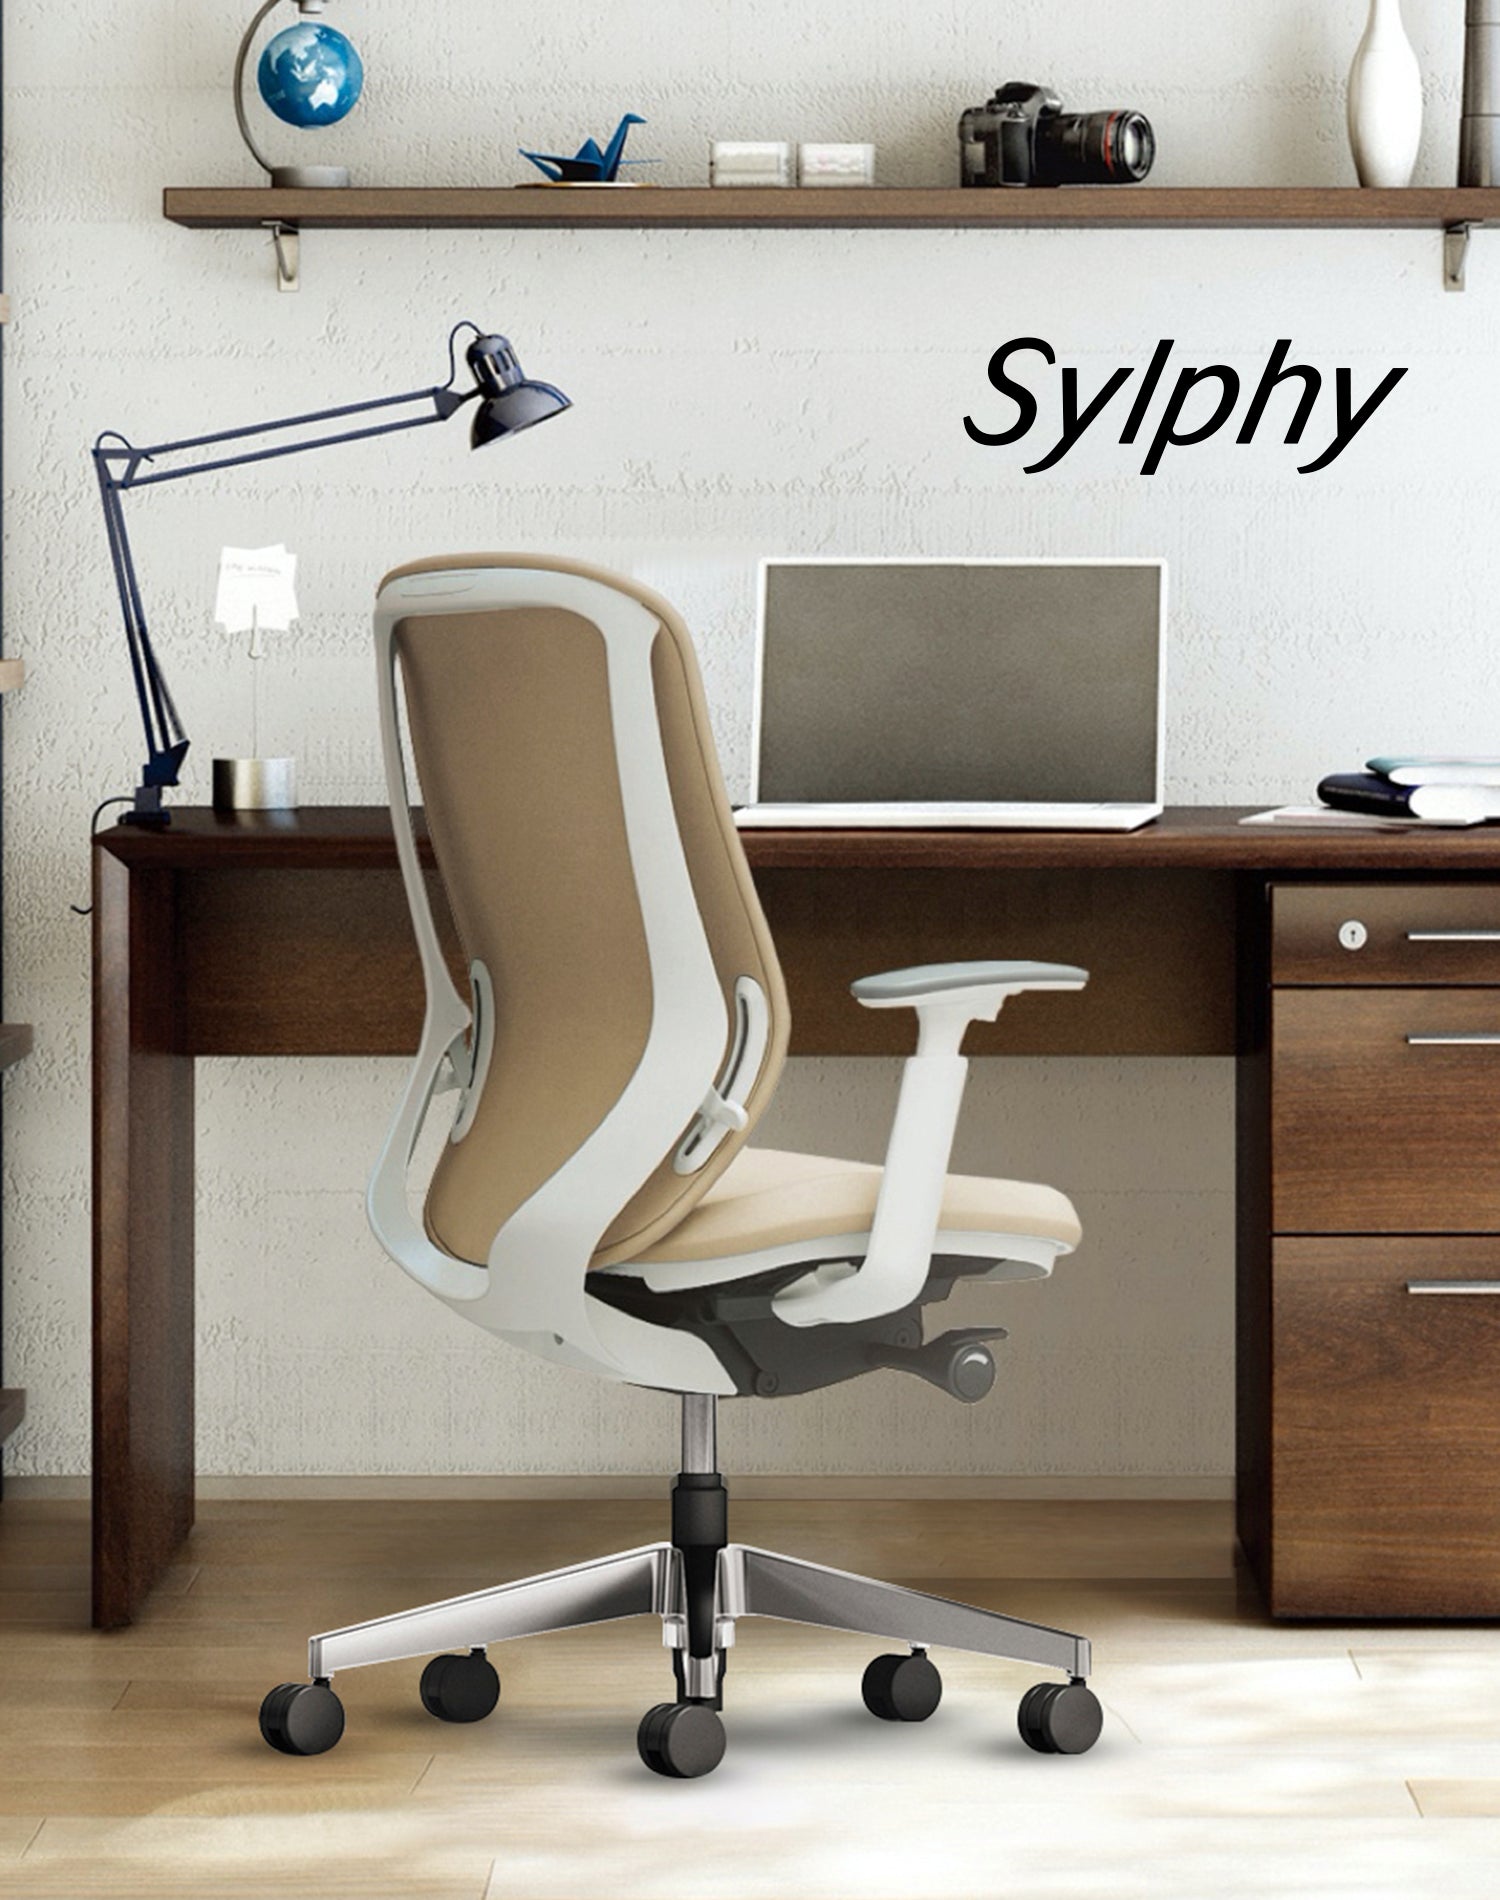 Sylphy ergonomic chair in home office